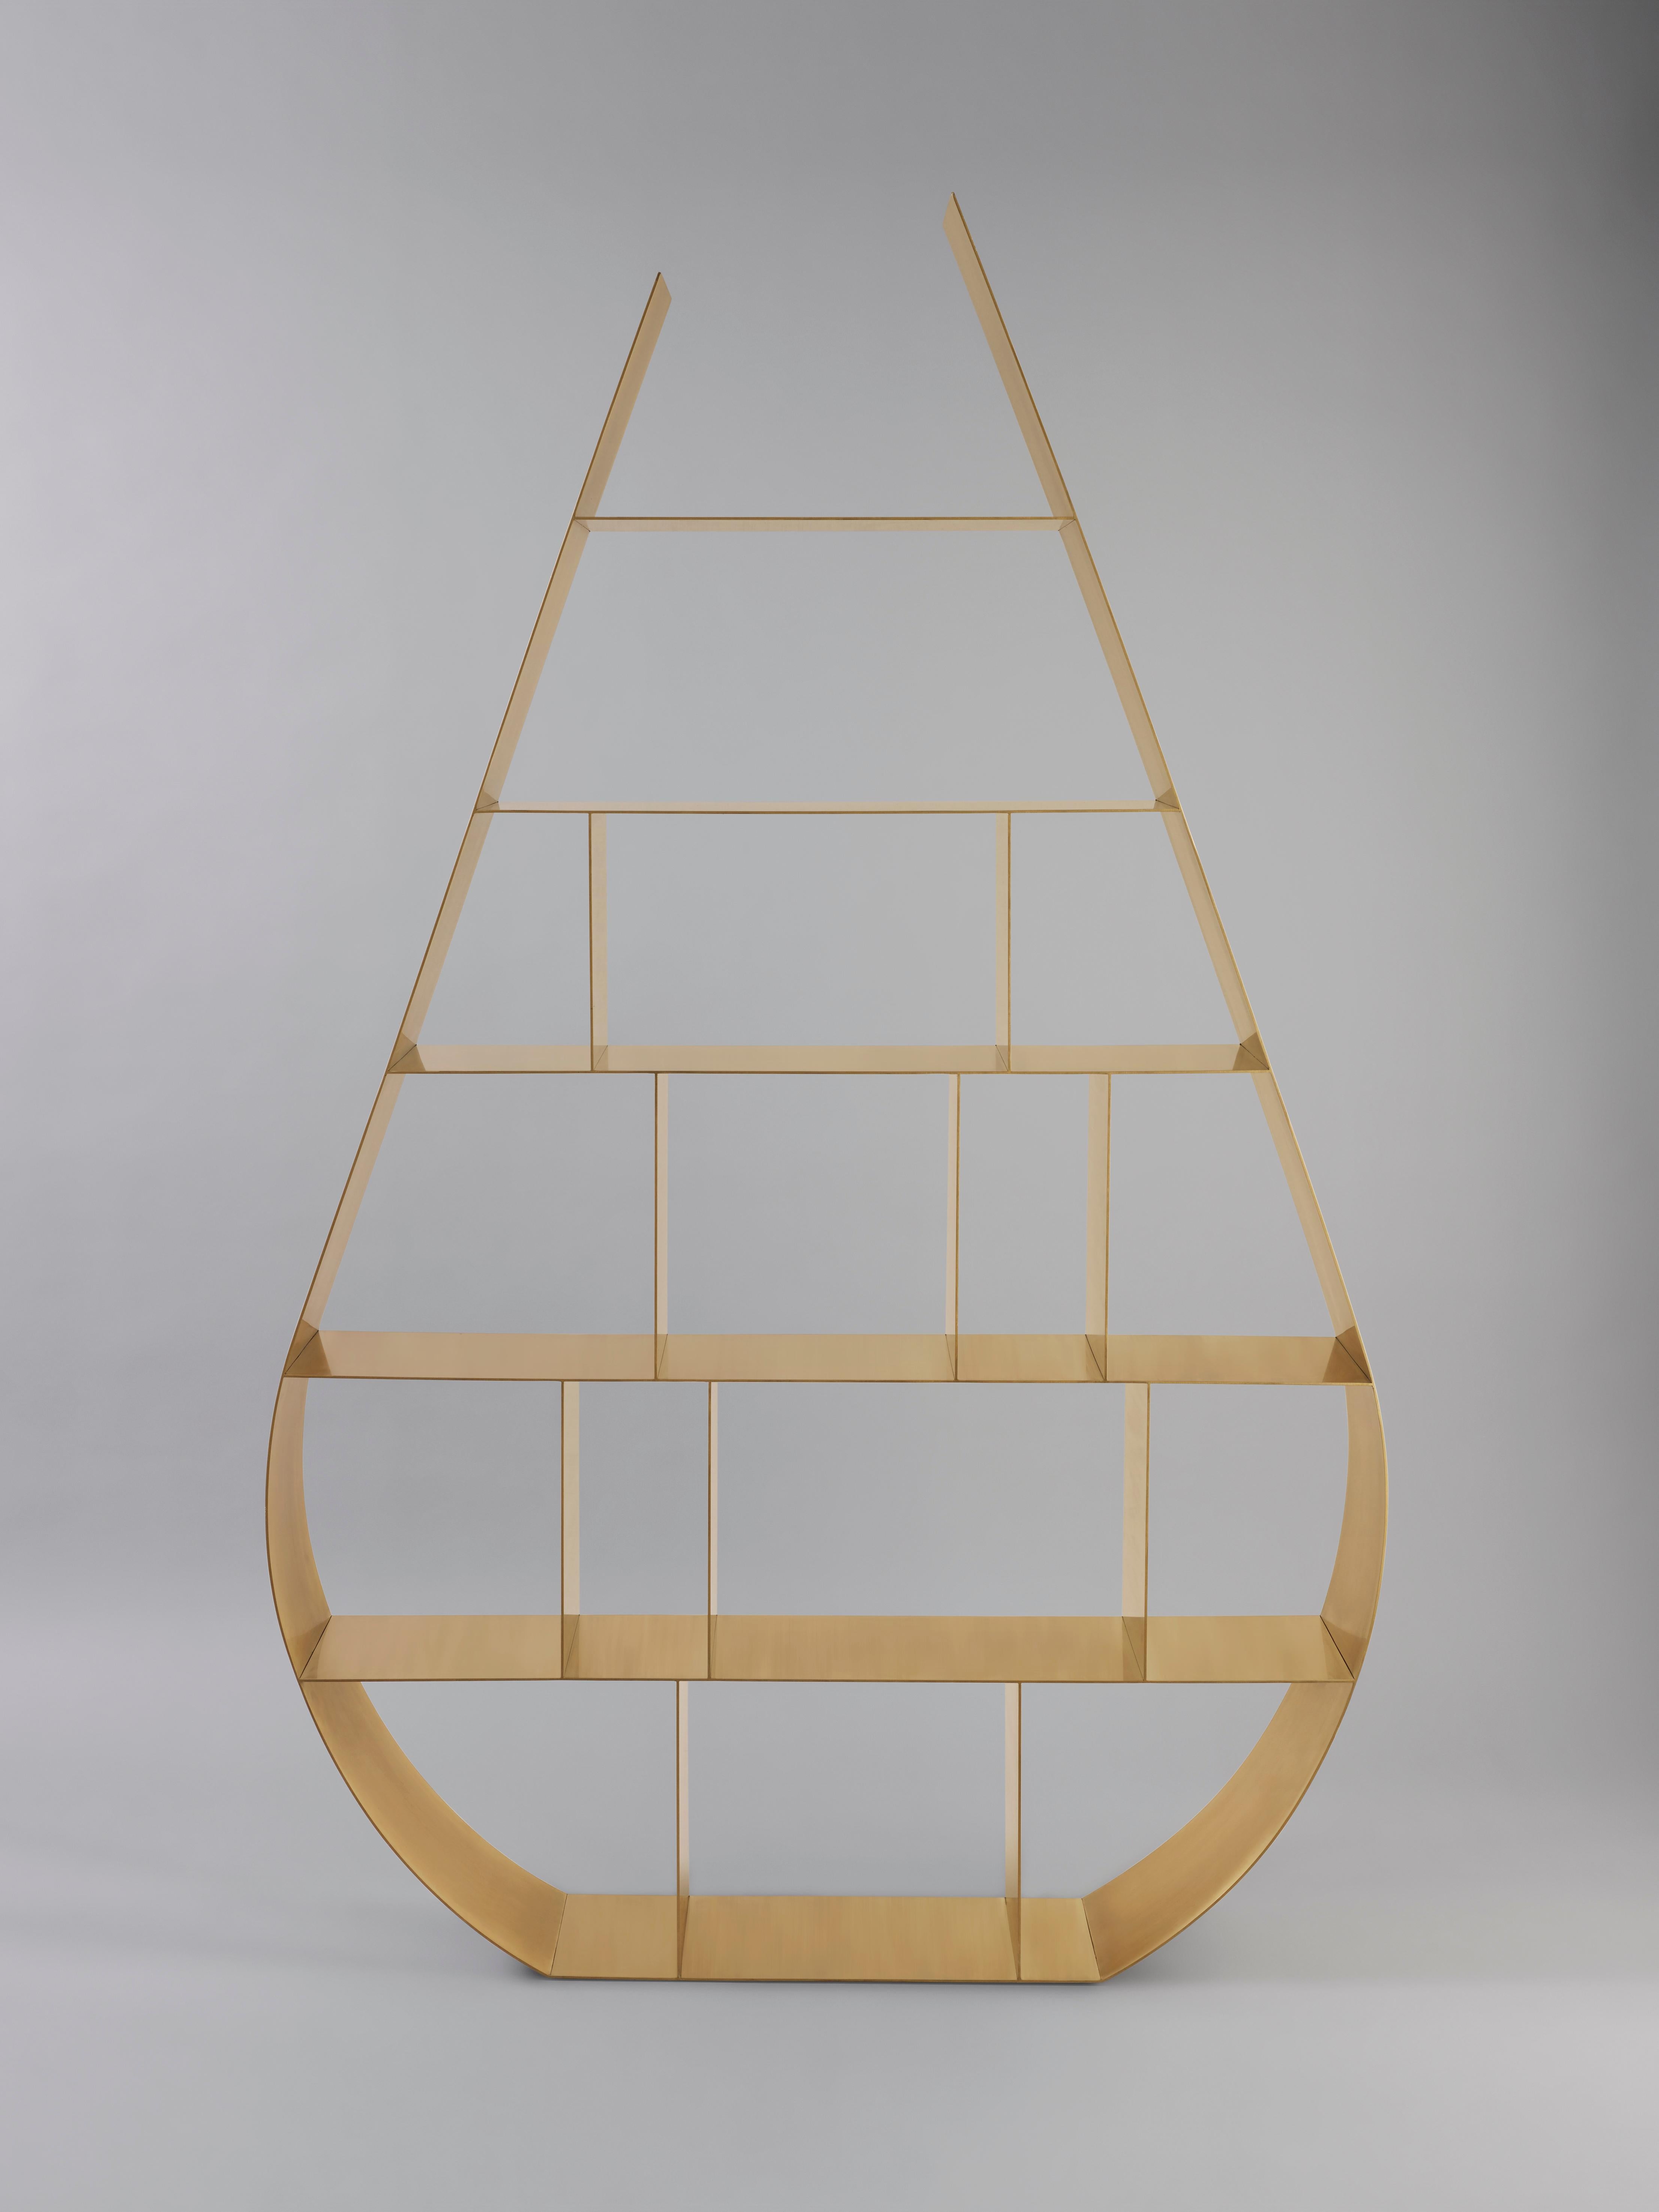 Inspired by ancient Chinese gardens and shaped like natural water droplets, 'Shuidi' can divide a space without visual barriers and welcome books or small objects. This bookcase and shelving unit by acclaimed design duo Studio MVW is made of brushed